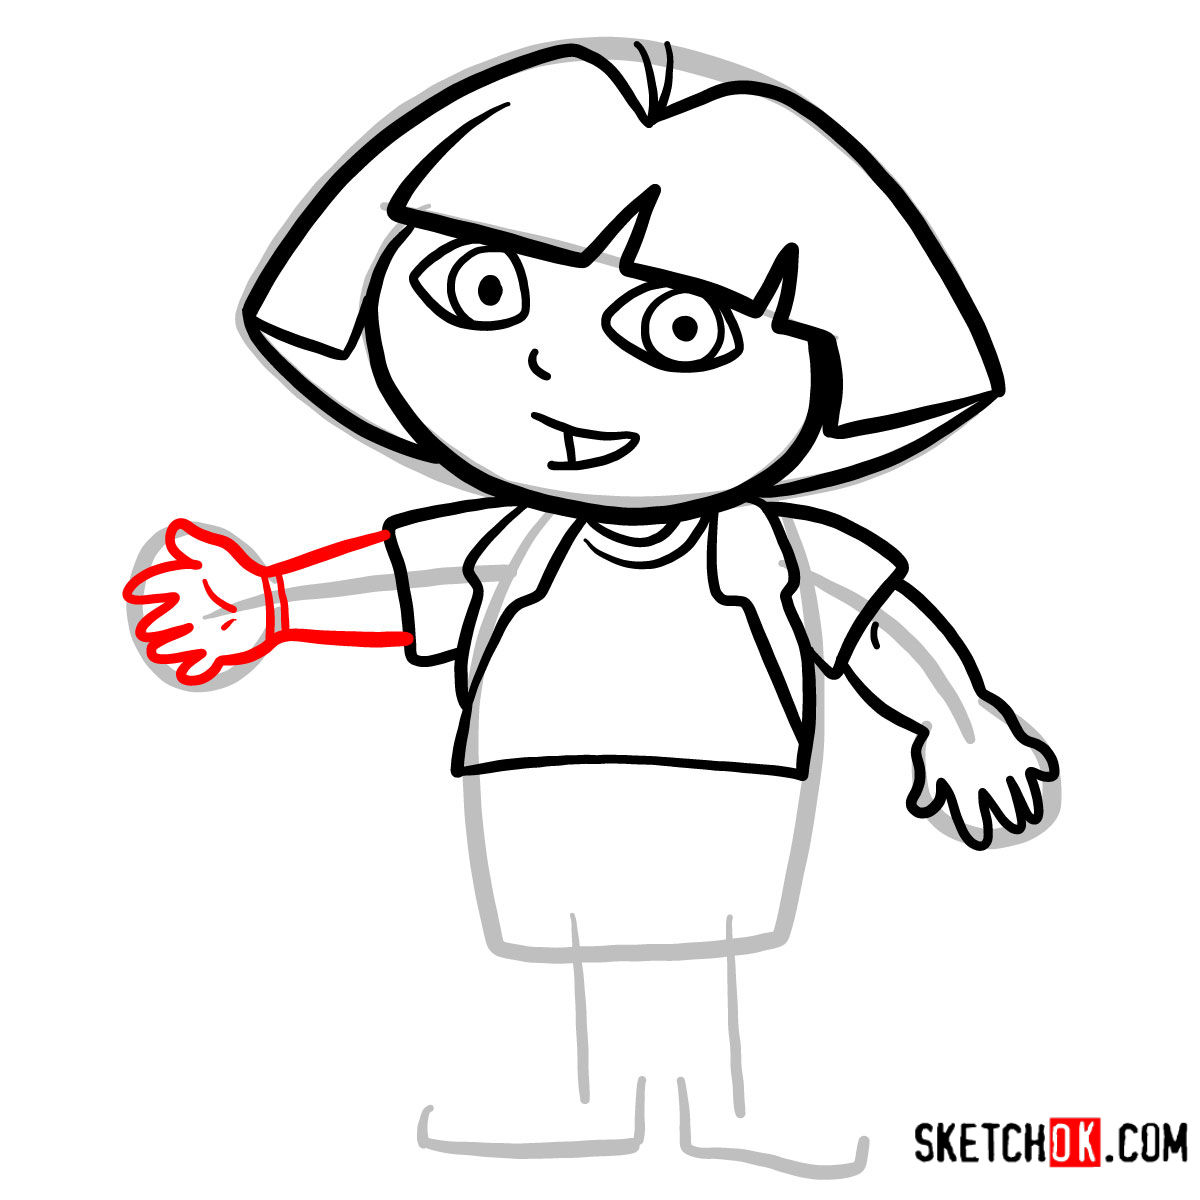 How to draw Dora the Explorer - Sketchok easy drawing guides